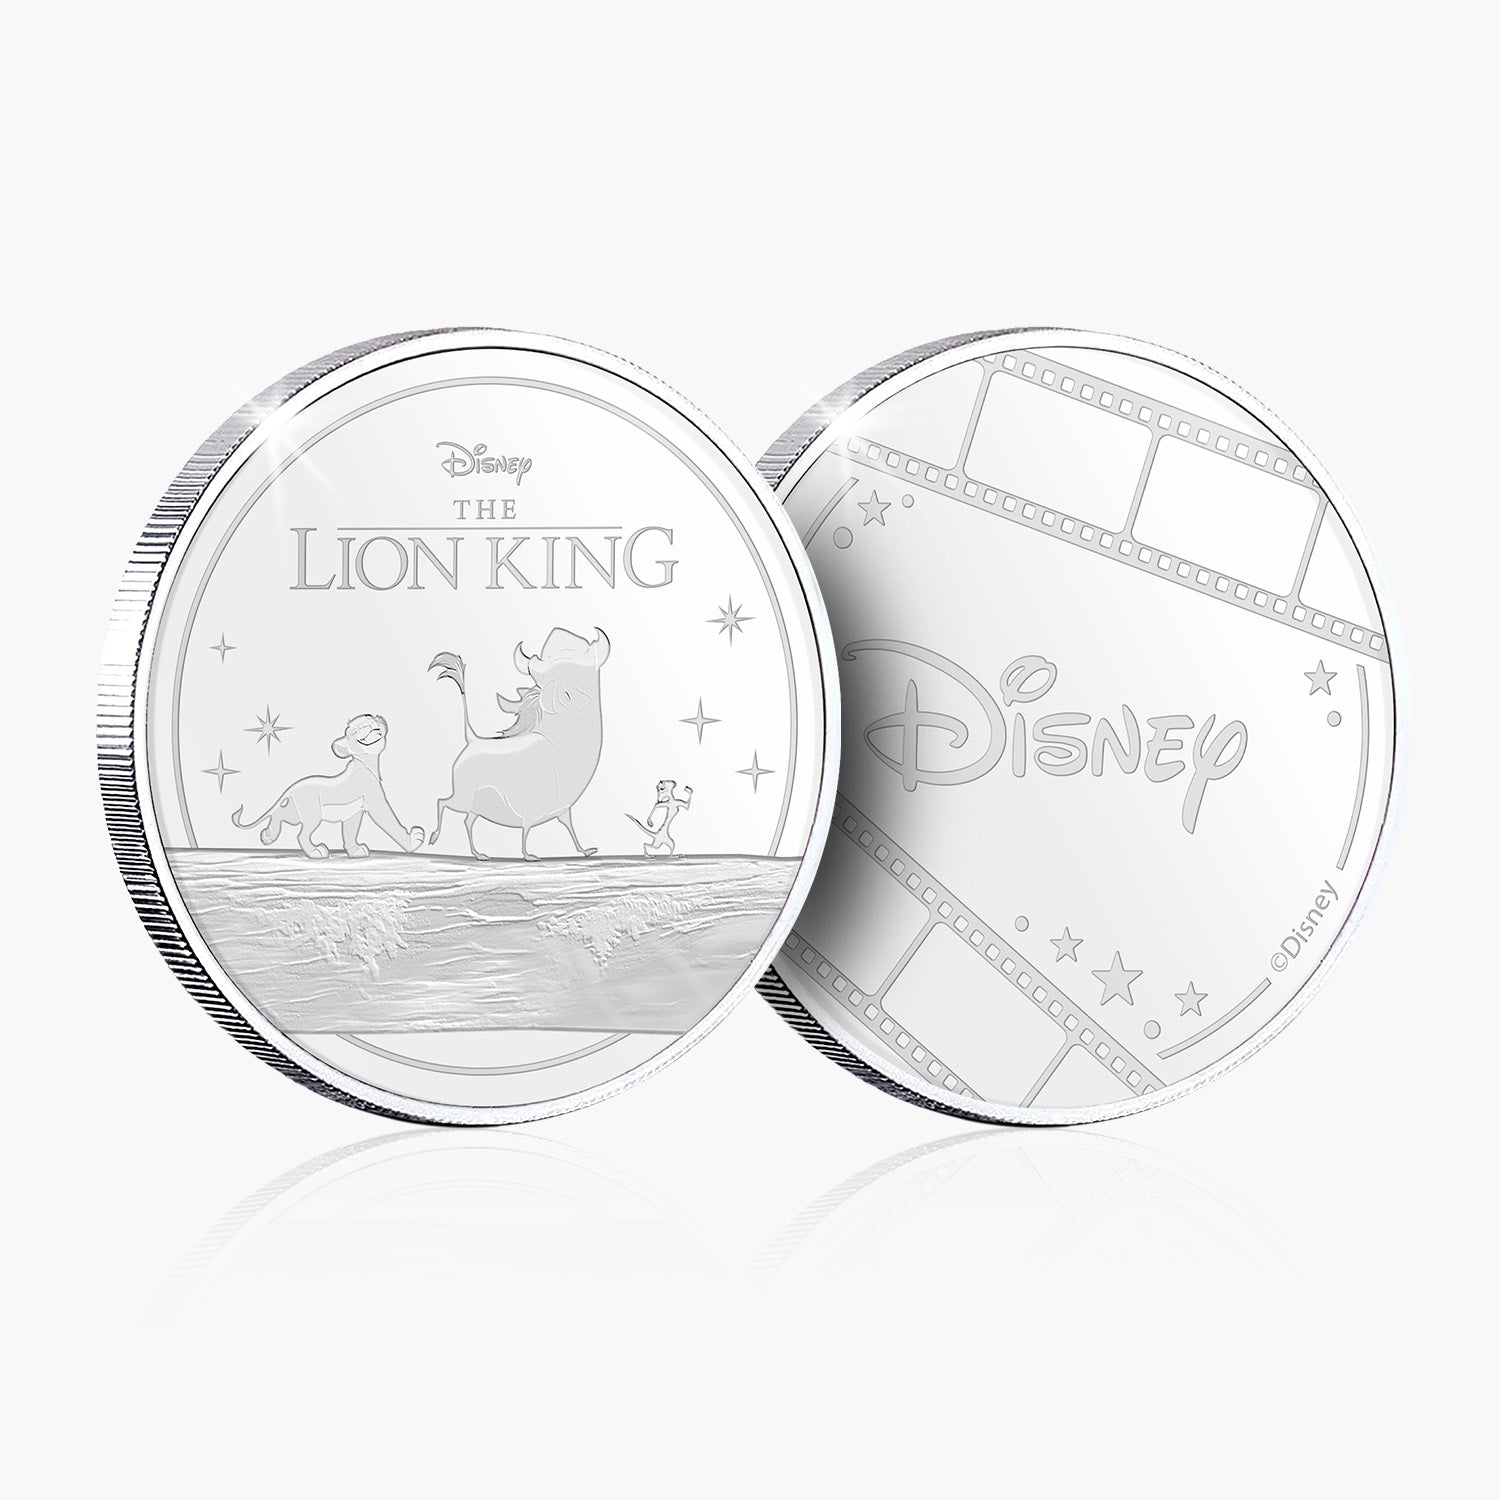 The Lion King Silver Commemorative